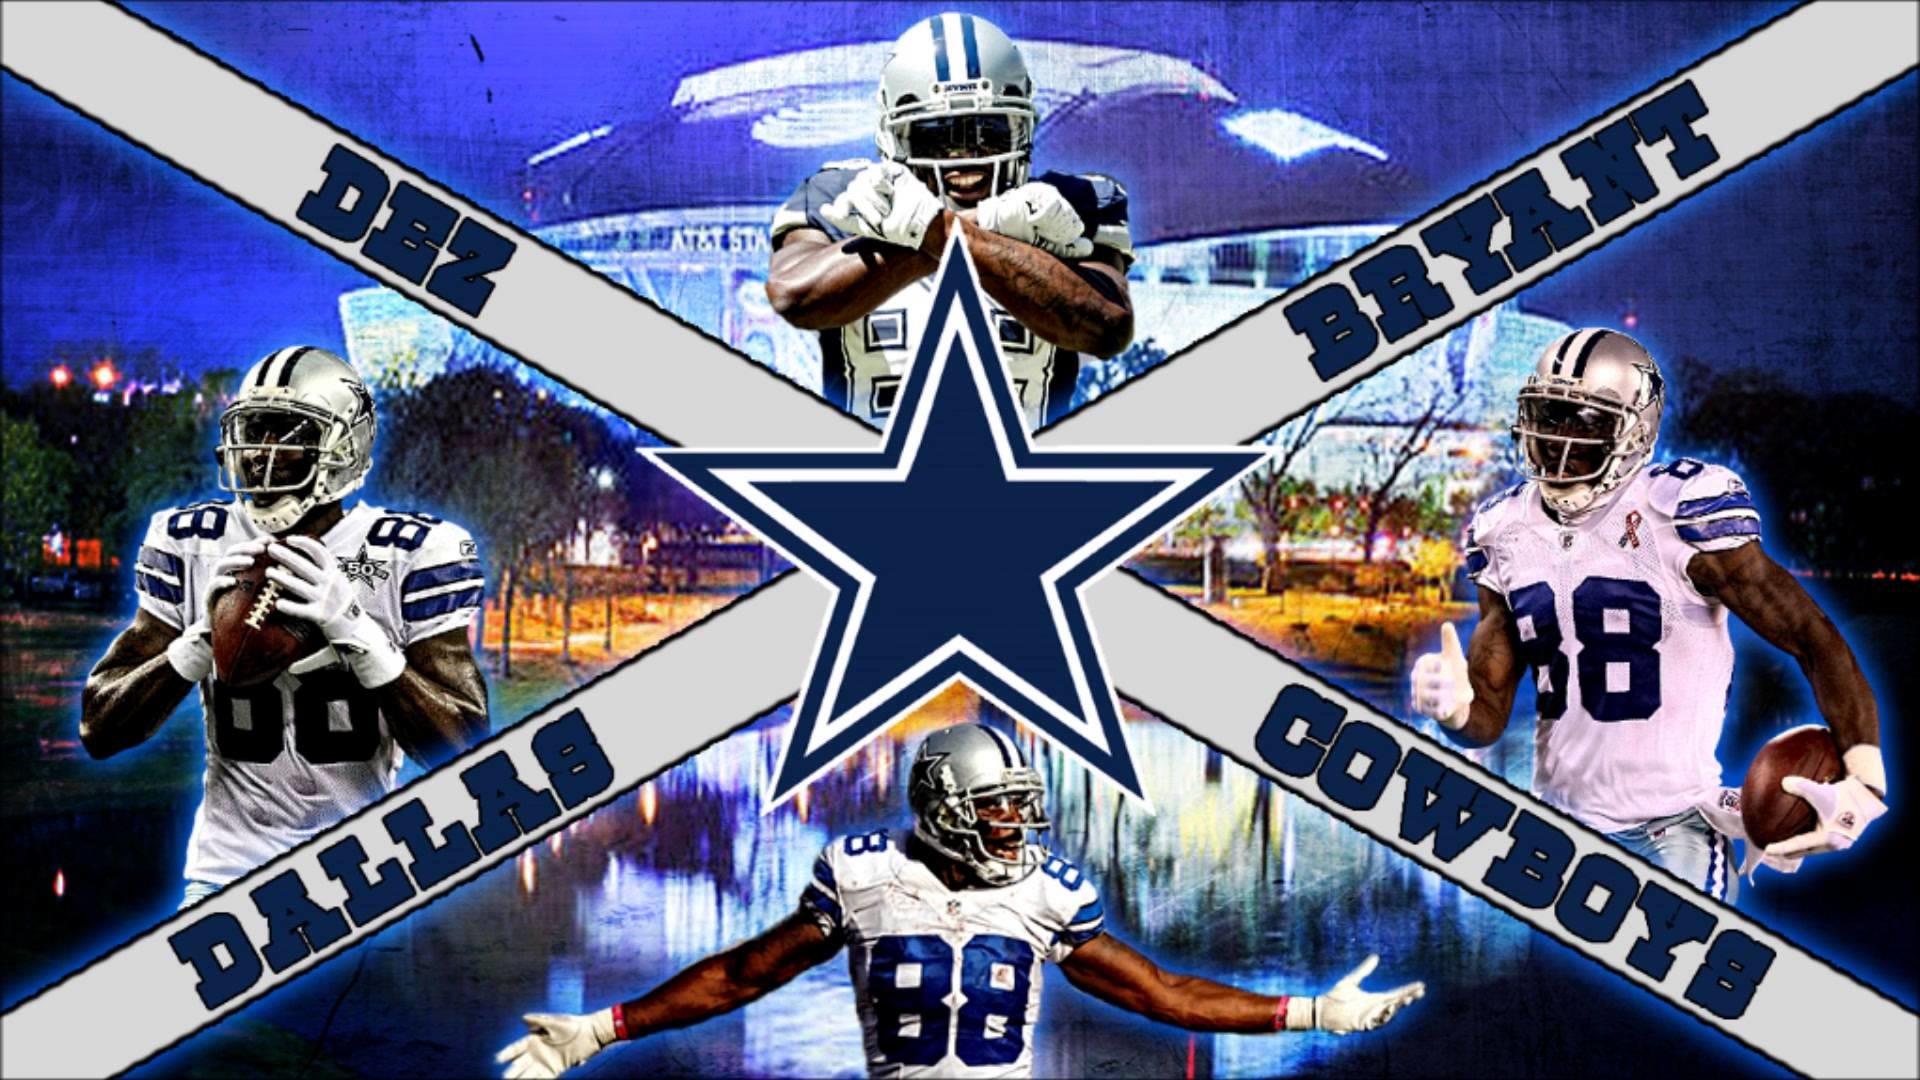 1920x1080 Download Free Dallas Cowboys Wallpapers (56 Wallpapers) – HD Wallpapers